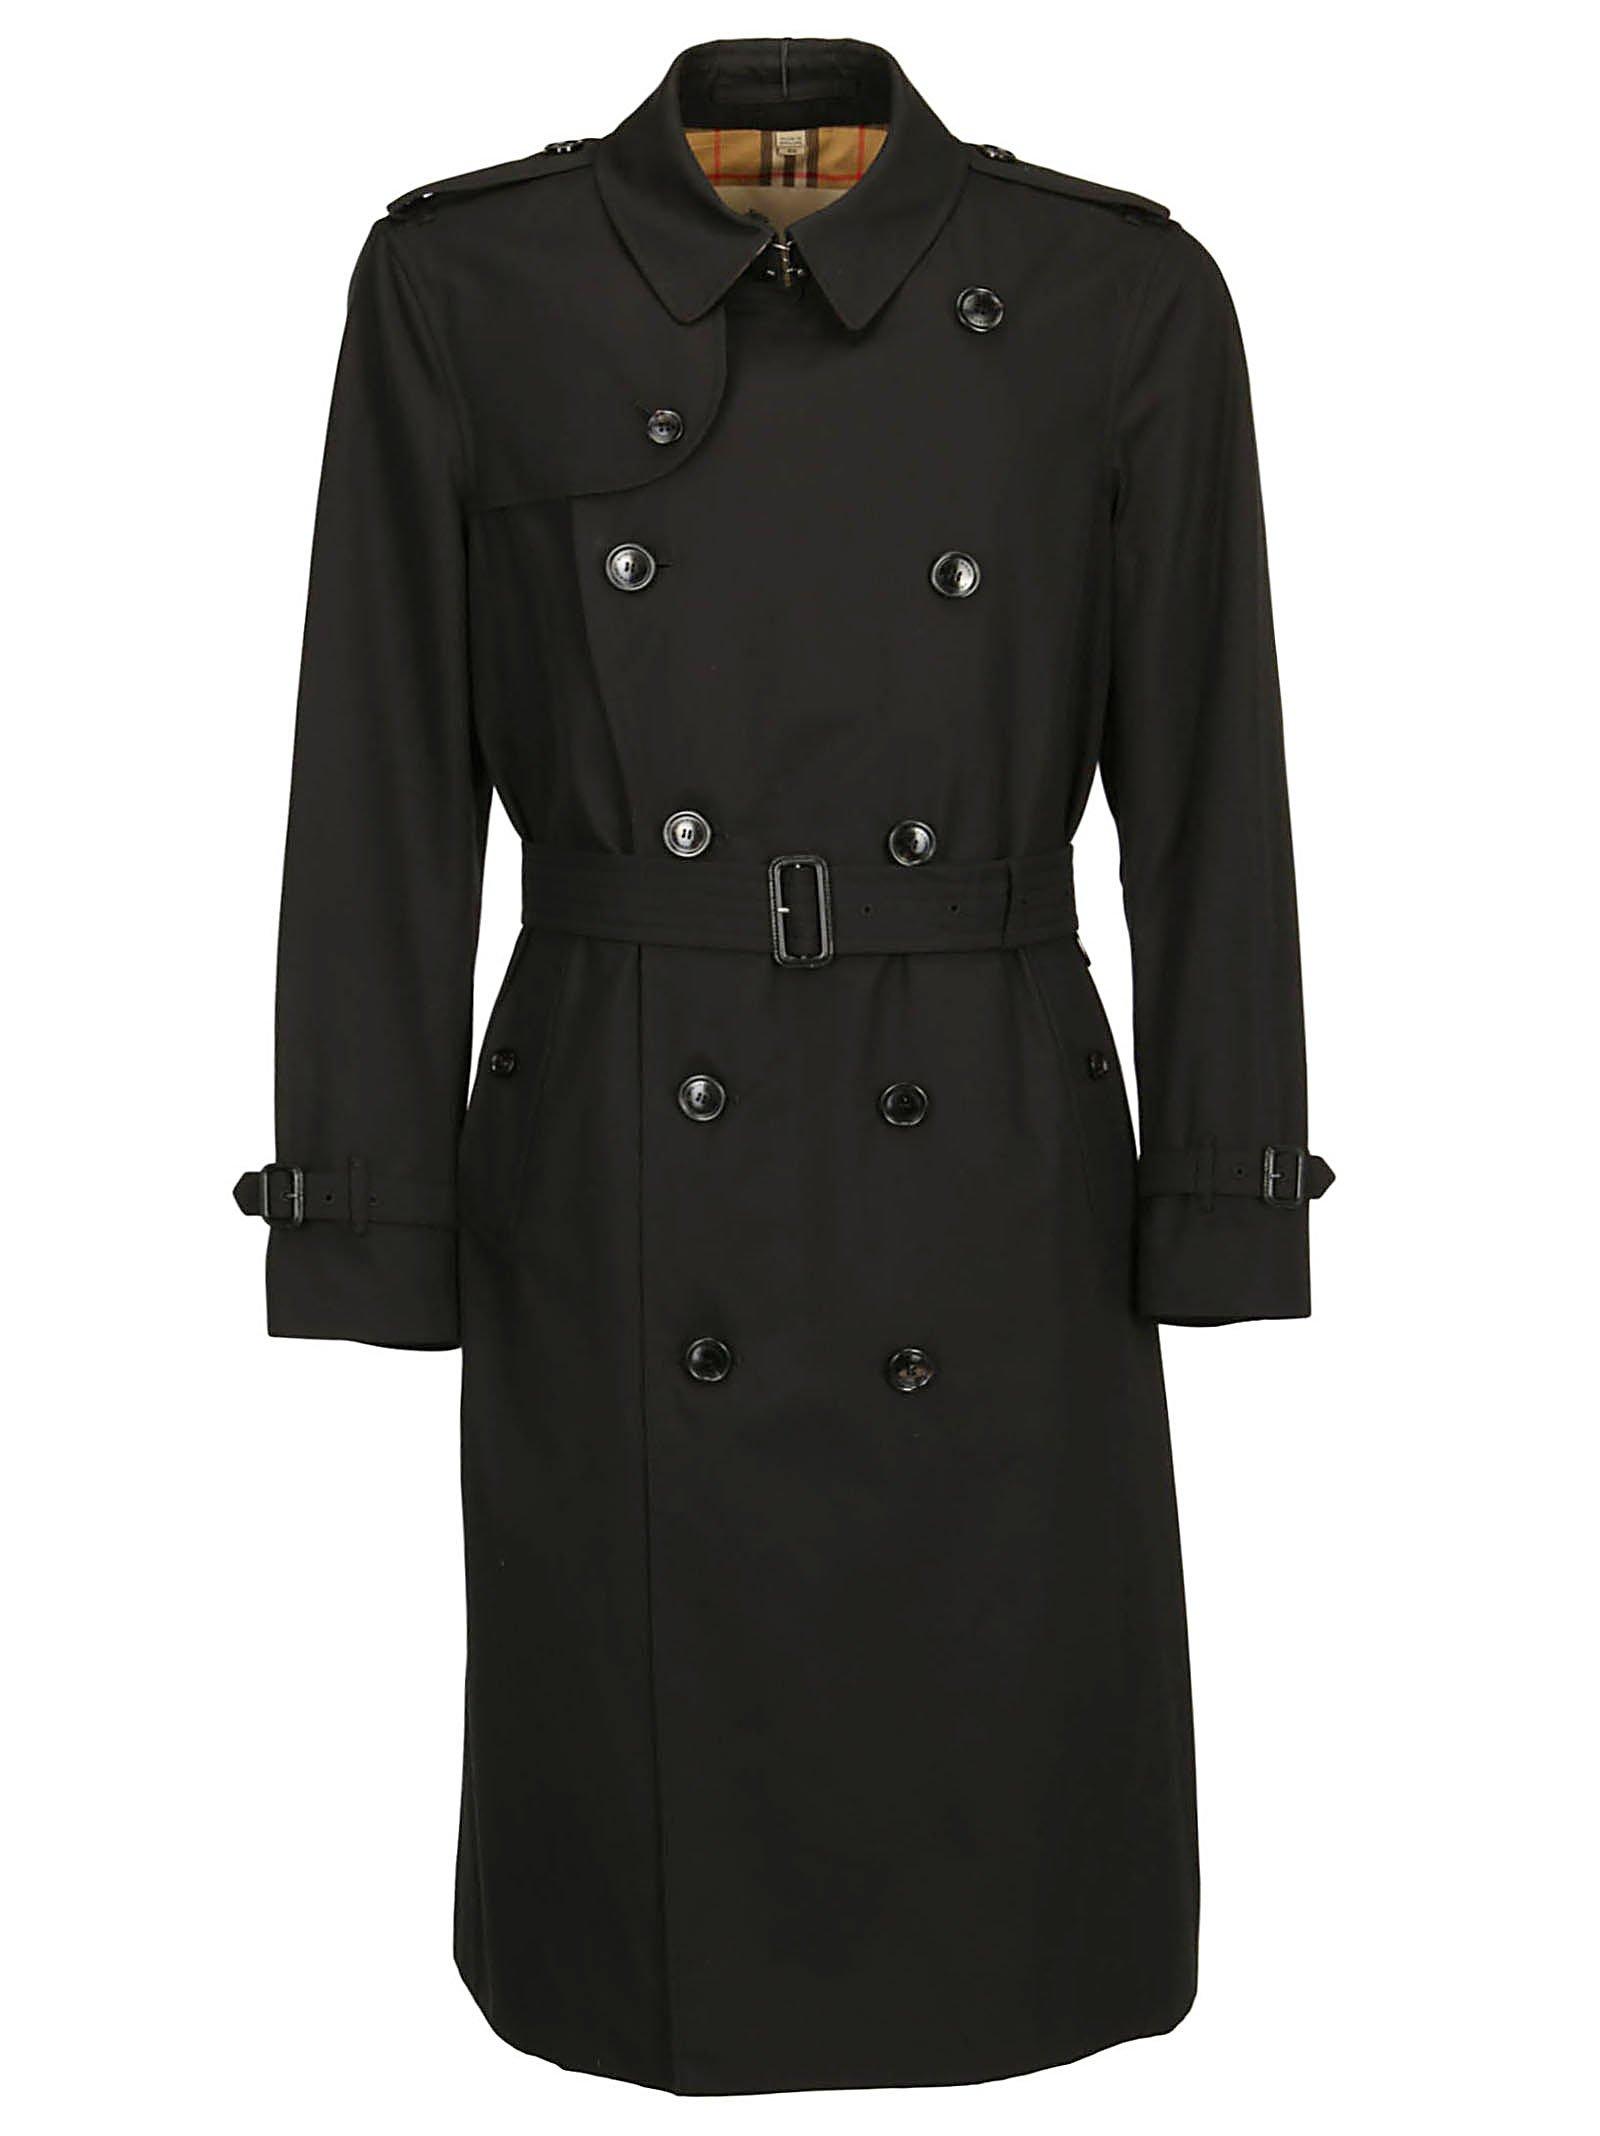 Burberry Chelsea Double Breasted Trench Coat in Black for Men - Lyst